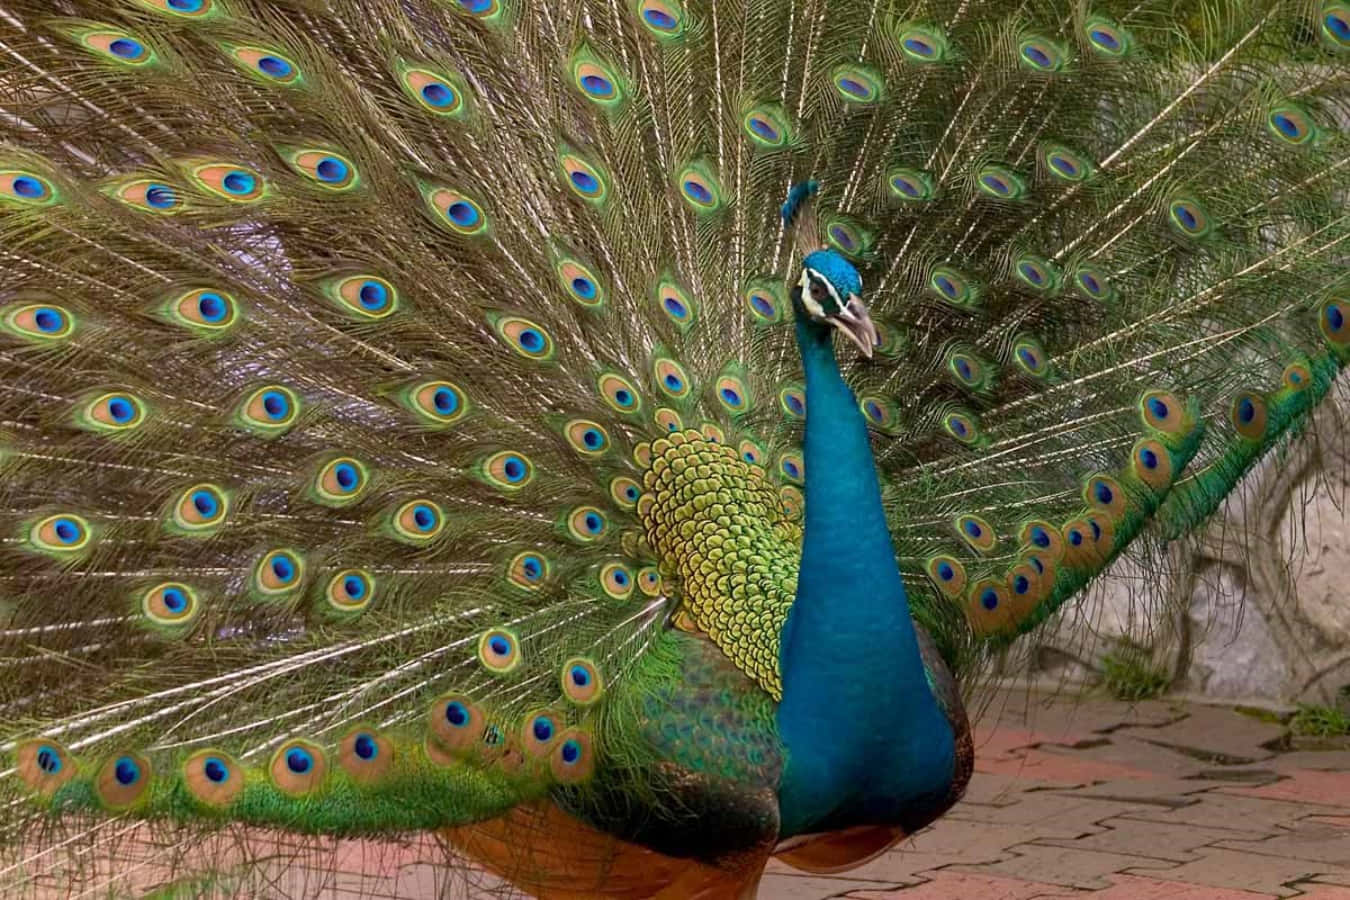 Peacock With Feathers Spread Out On The Ground